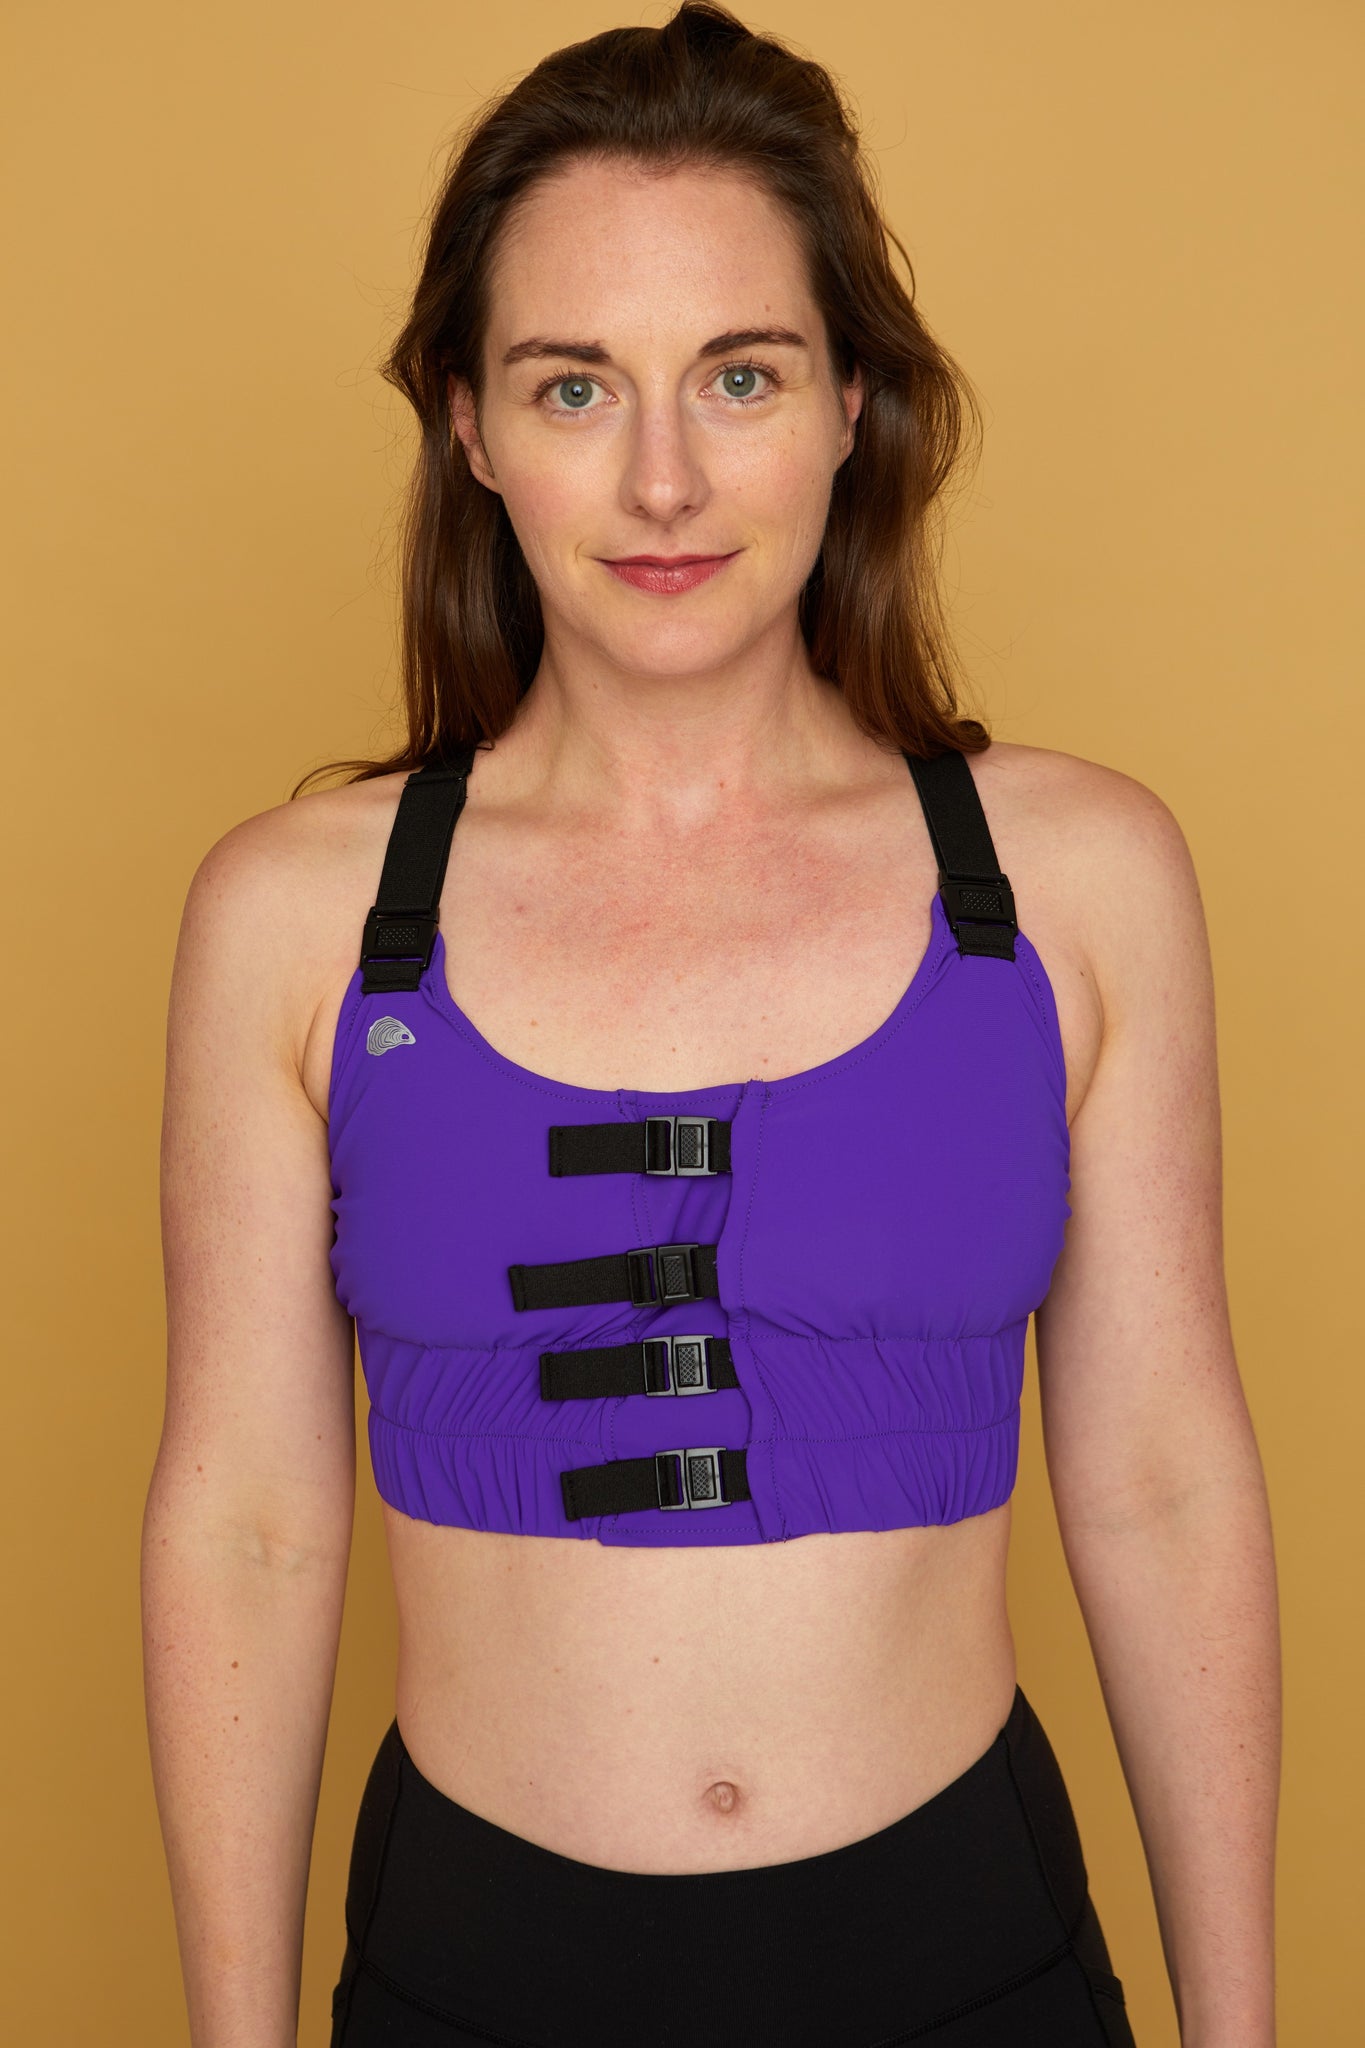 Compression Bra - Surgical Bra for Stabilizing Breast after Breast